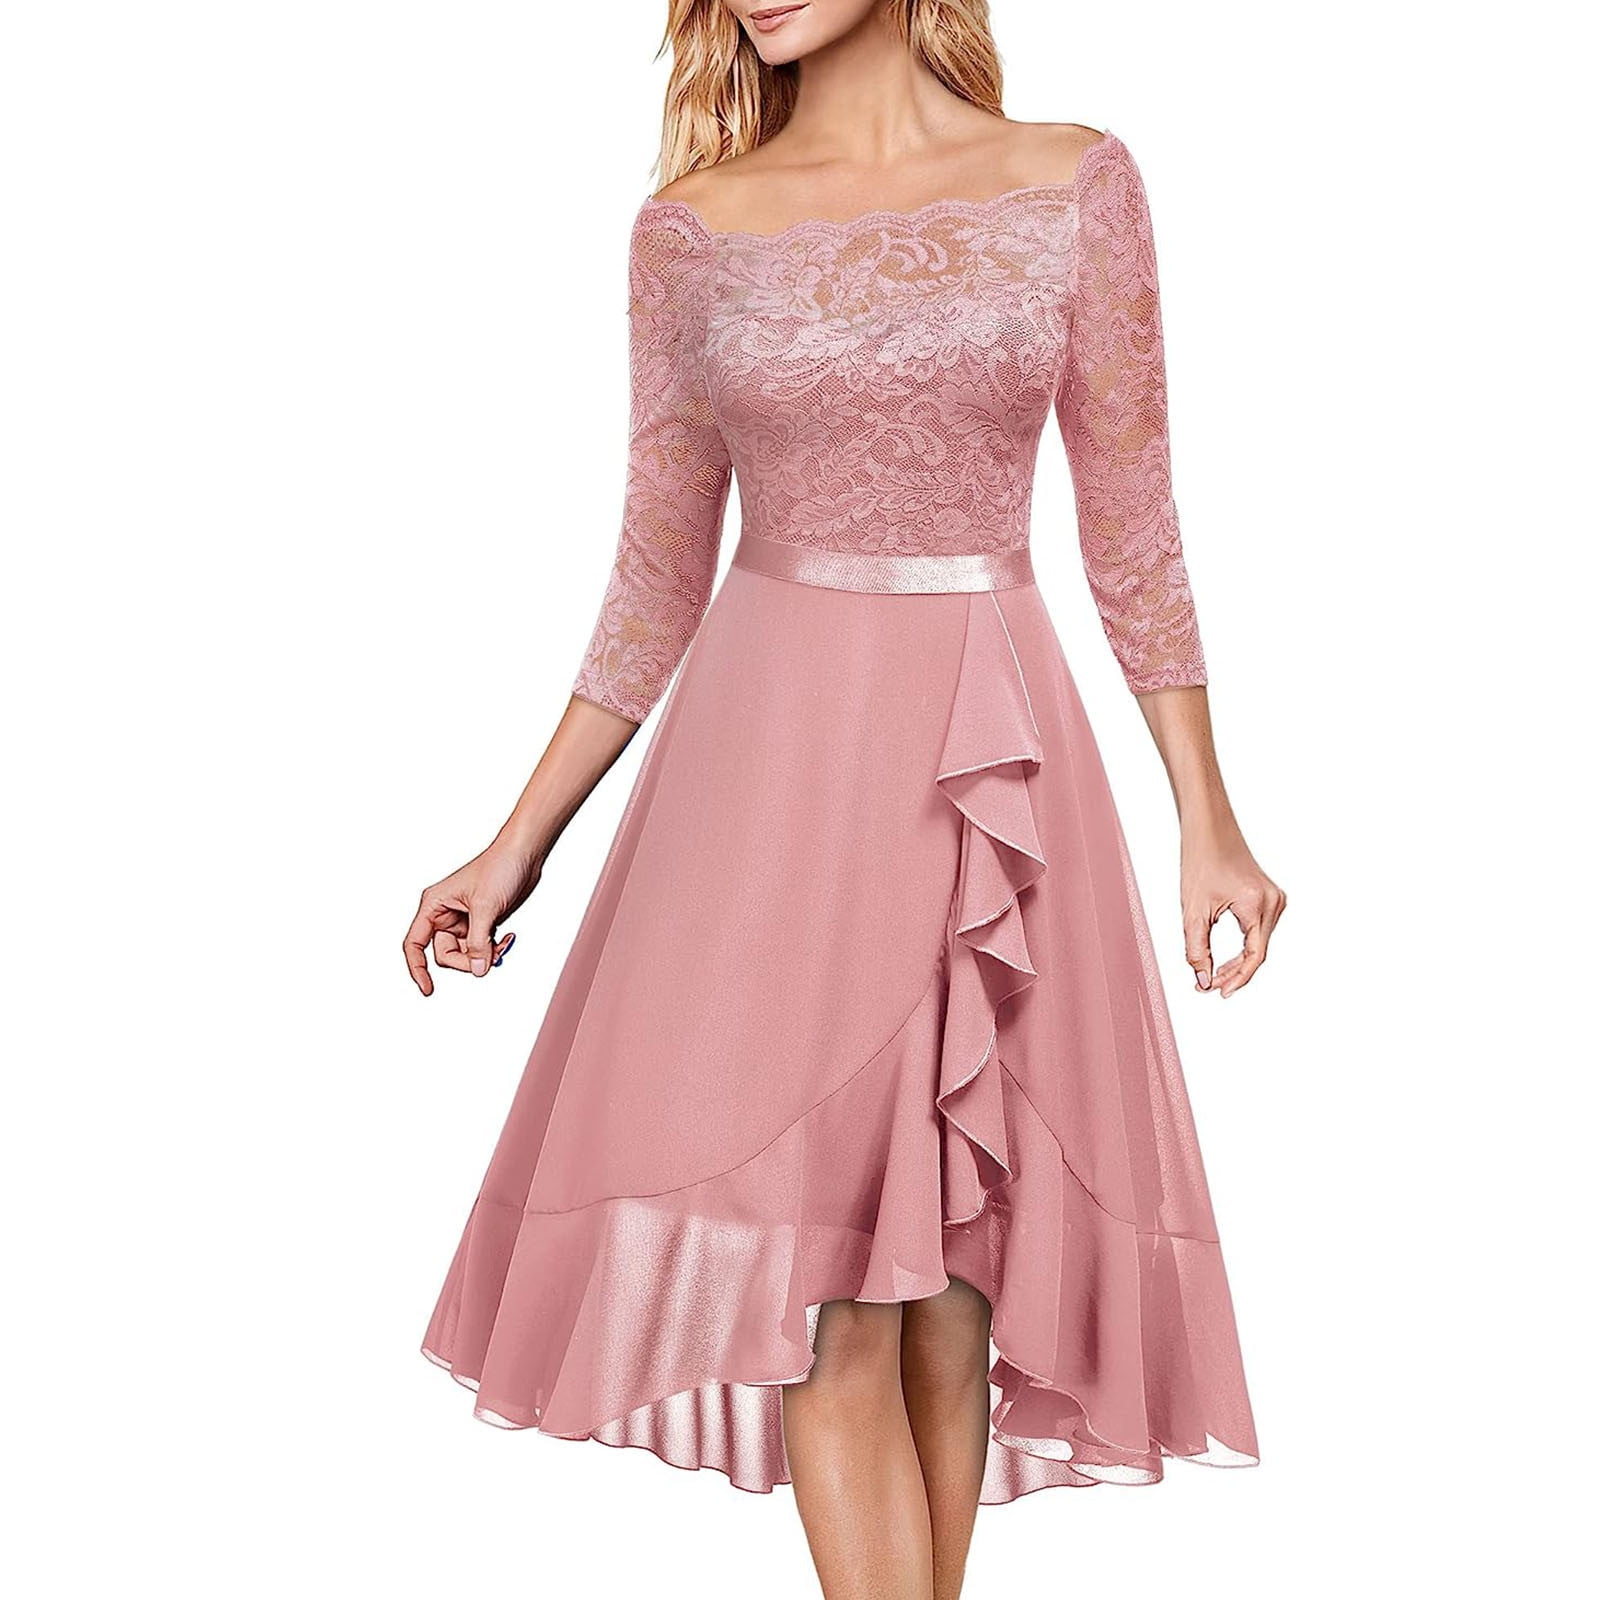 Fall Savings! Zpanxa Womens Wedding Guest Dresses, Lace Short Sleeves Party  Dress Cocktail Prom Ballgown Vintage Dress, Formal Dresses for Women